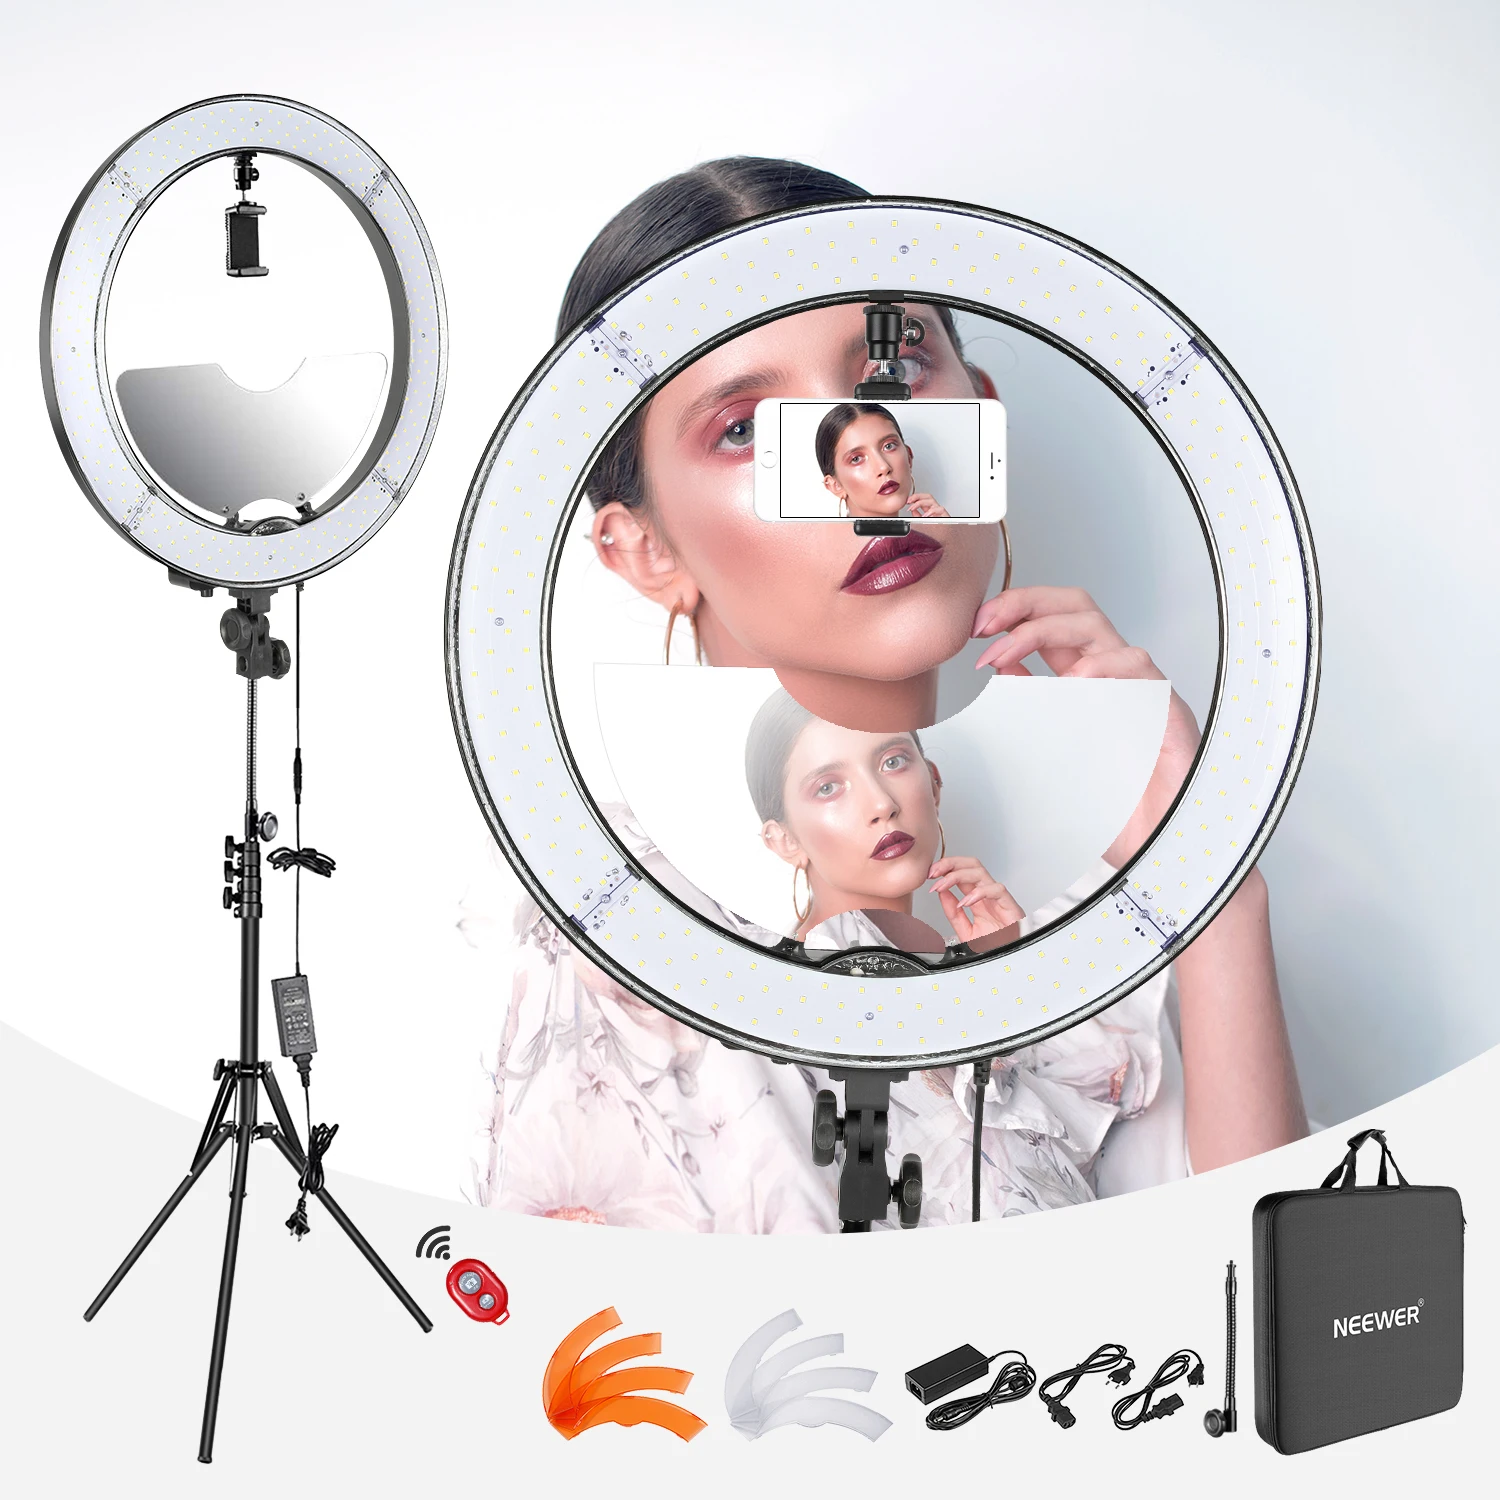 

Neewer LED Ring Light 18-inch Outer Diameter With Top/Bottom Dual Hot Shoe Mirror Smartphone Holder Light Stand Soft Tube Filter